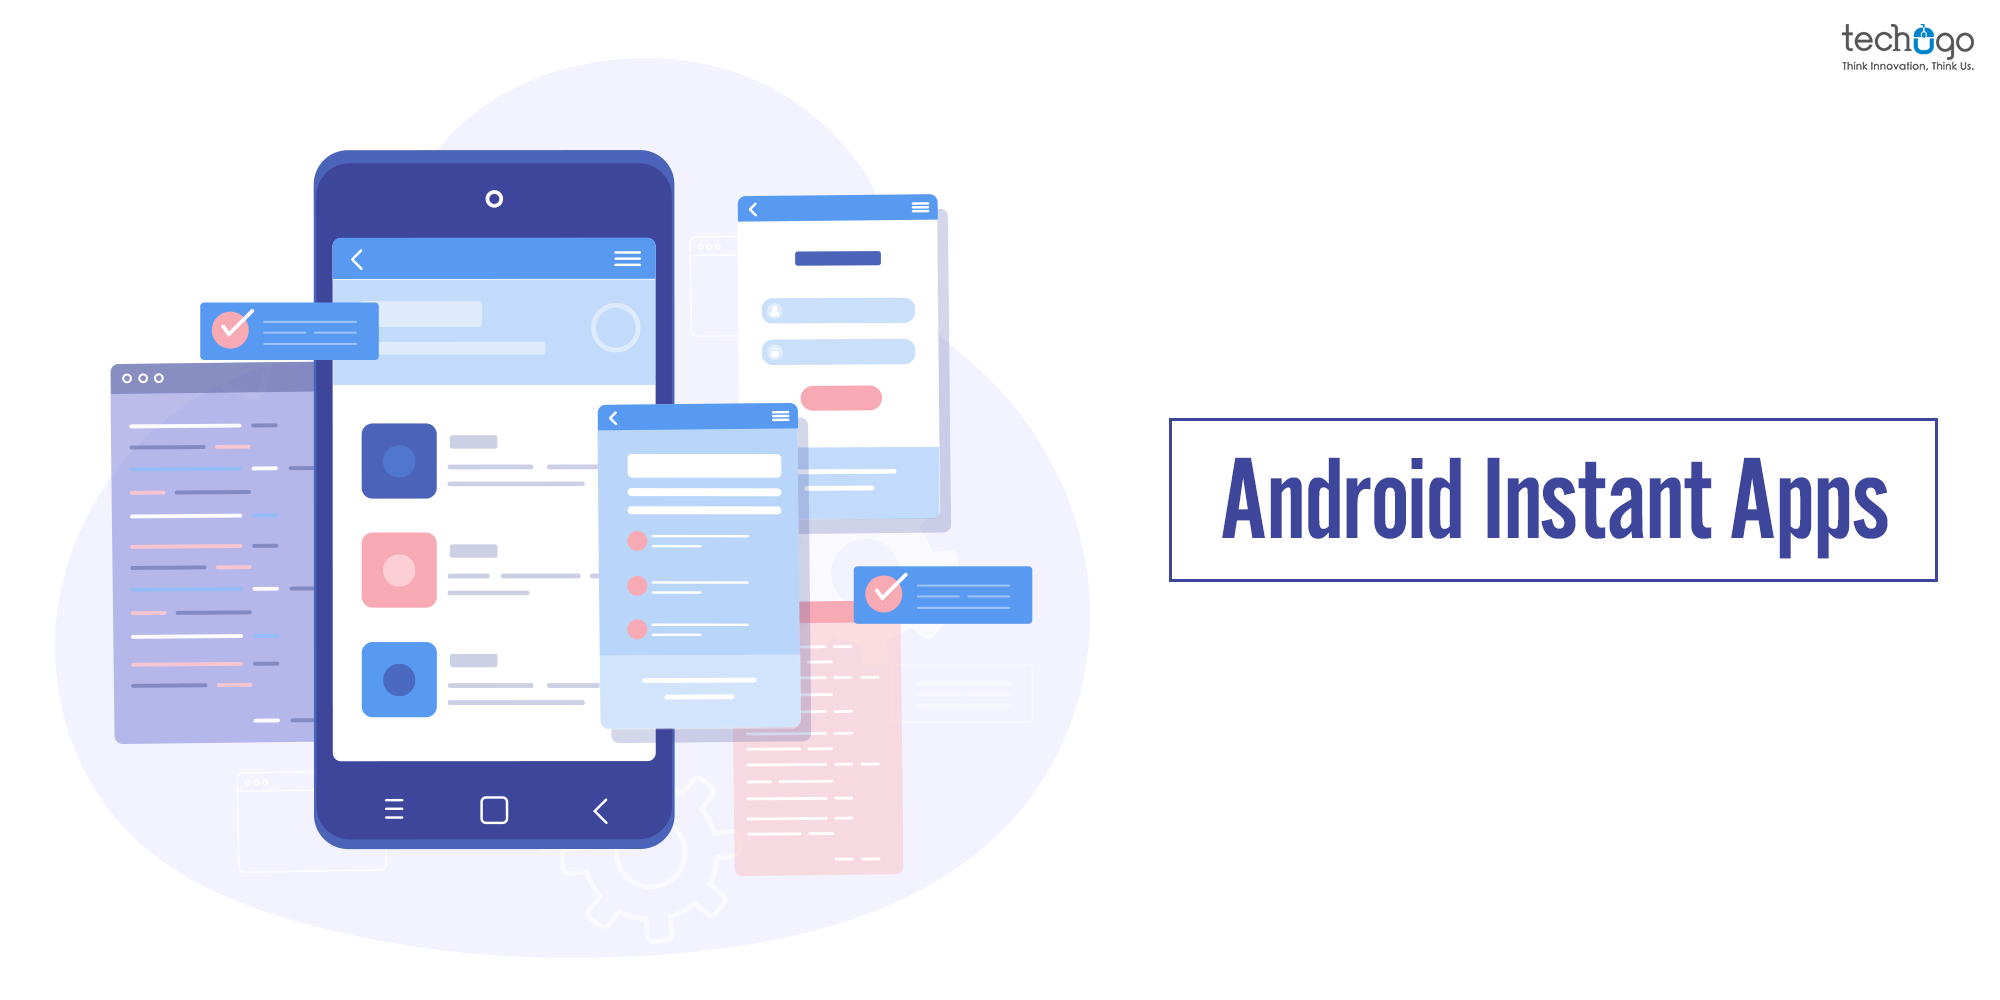 Android Instant apps